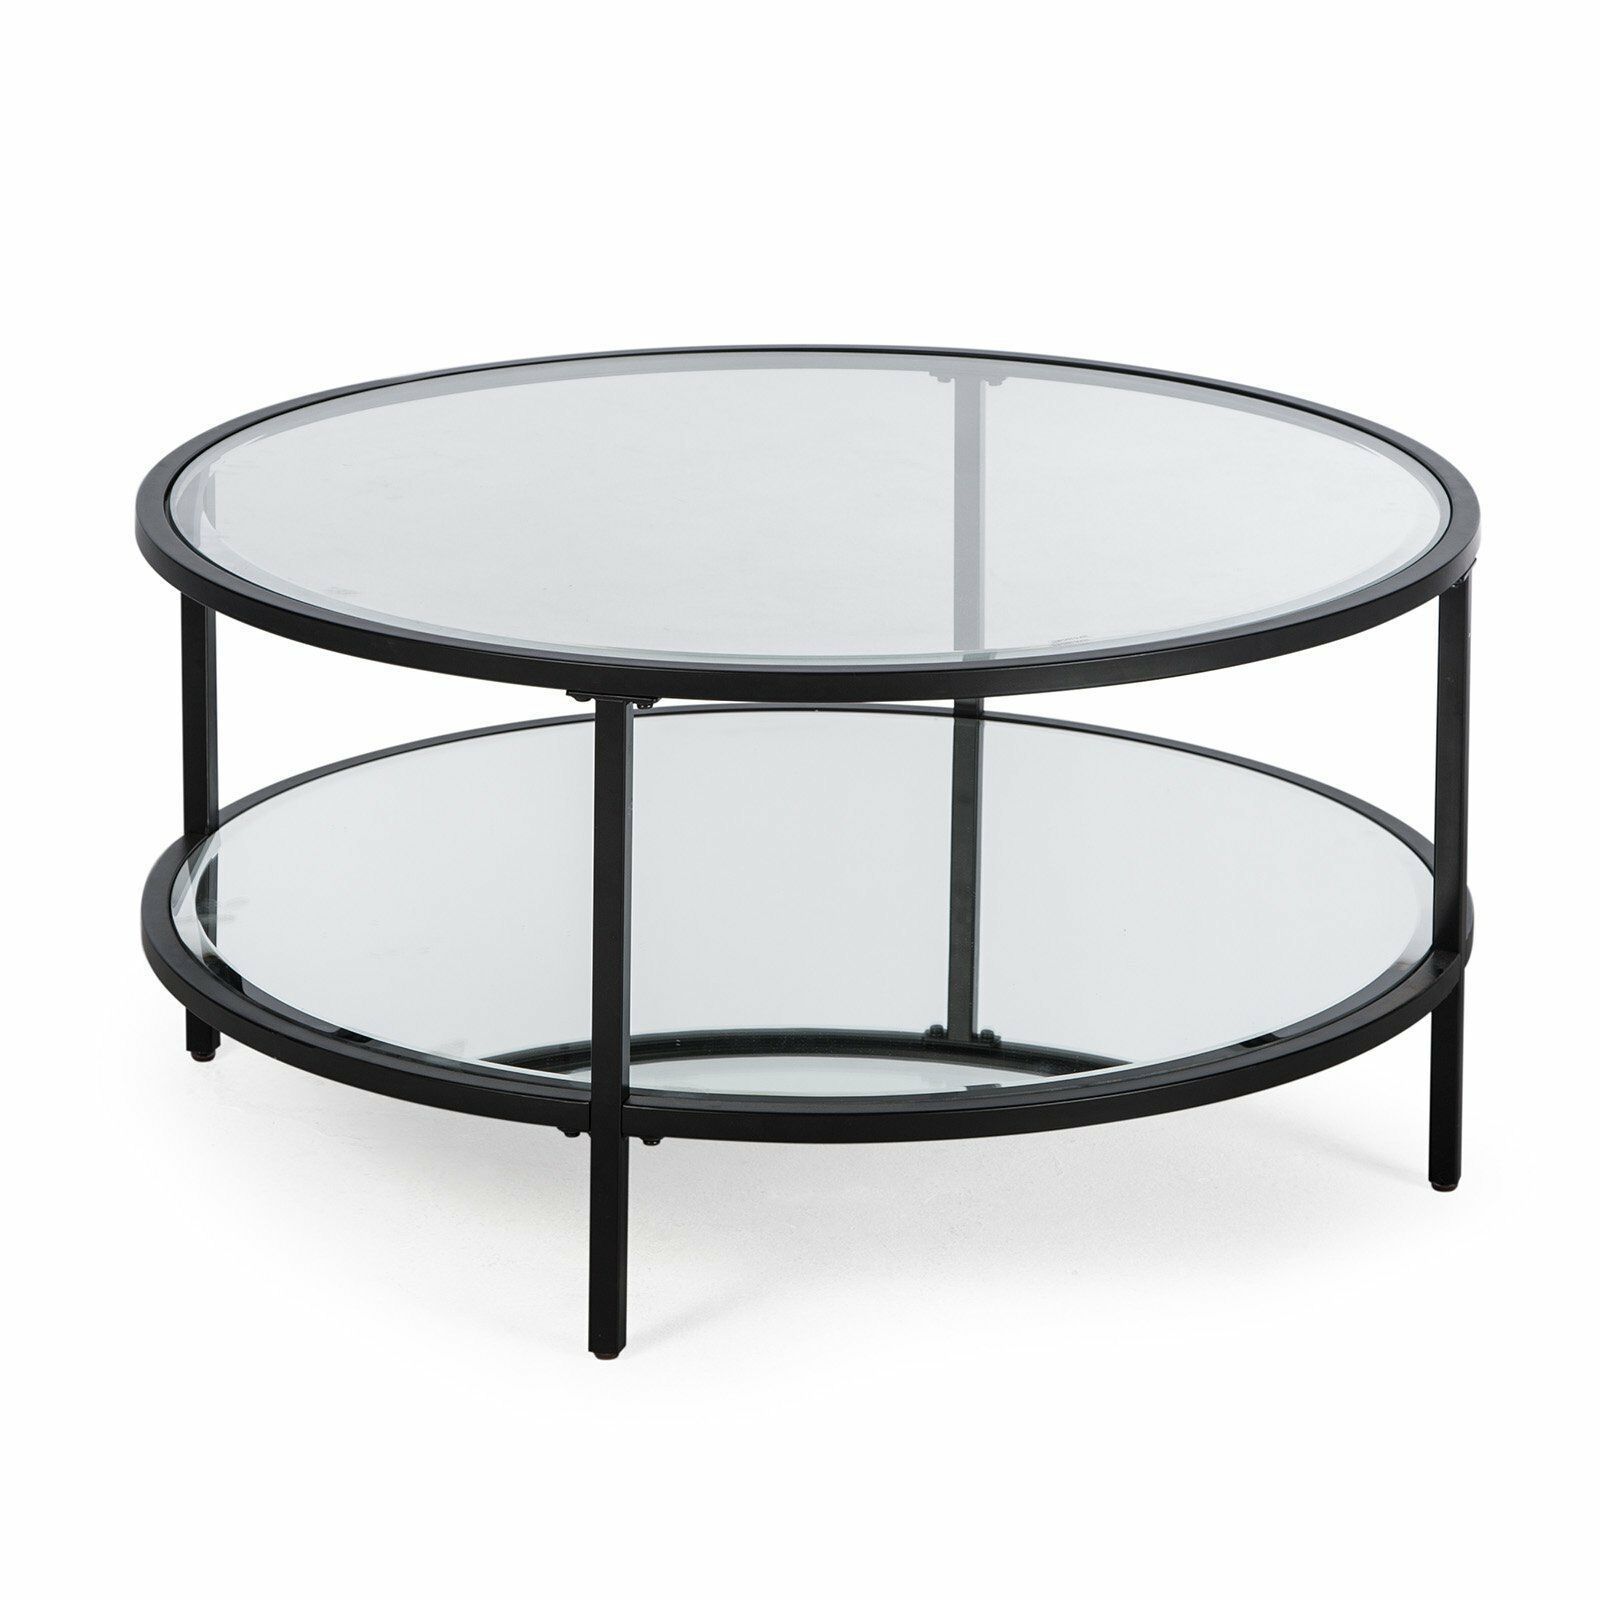 Contemporary Glam Metal Glass Modern Round Black Coffee Table W/ Shelf Inside Full Black Round Coffee Tables (Gallery 16 of 20)